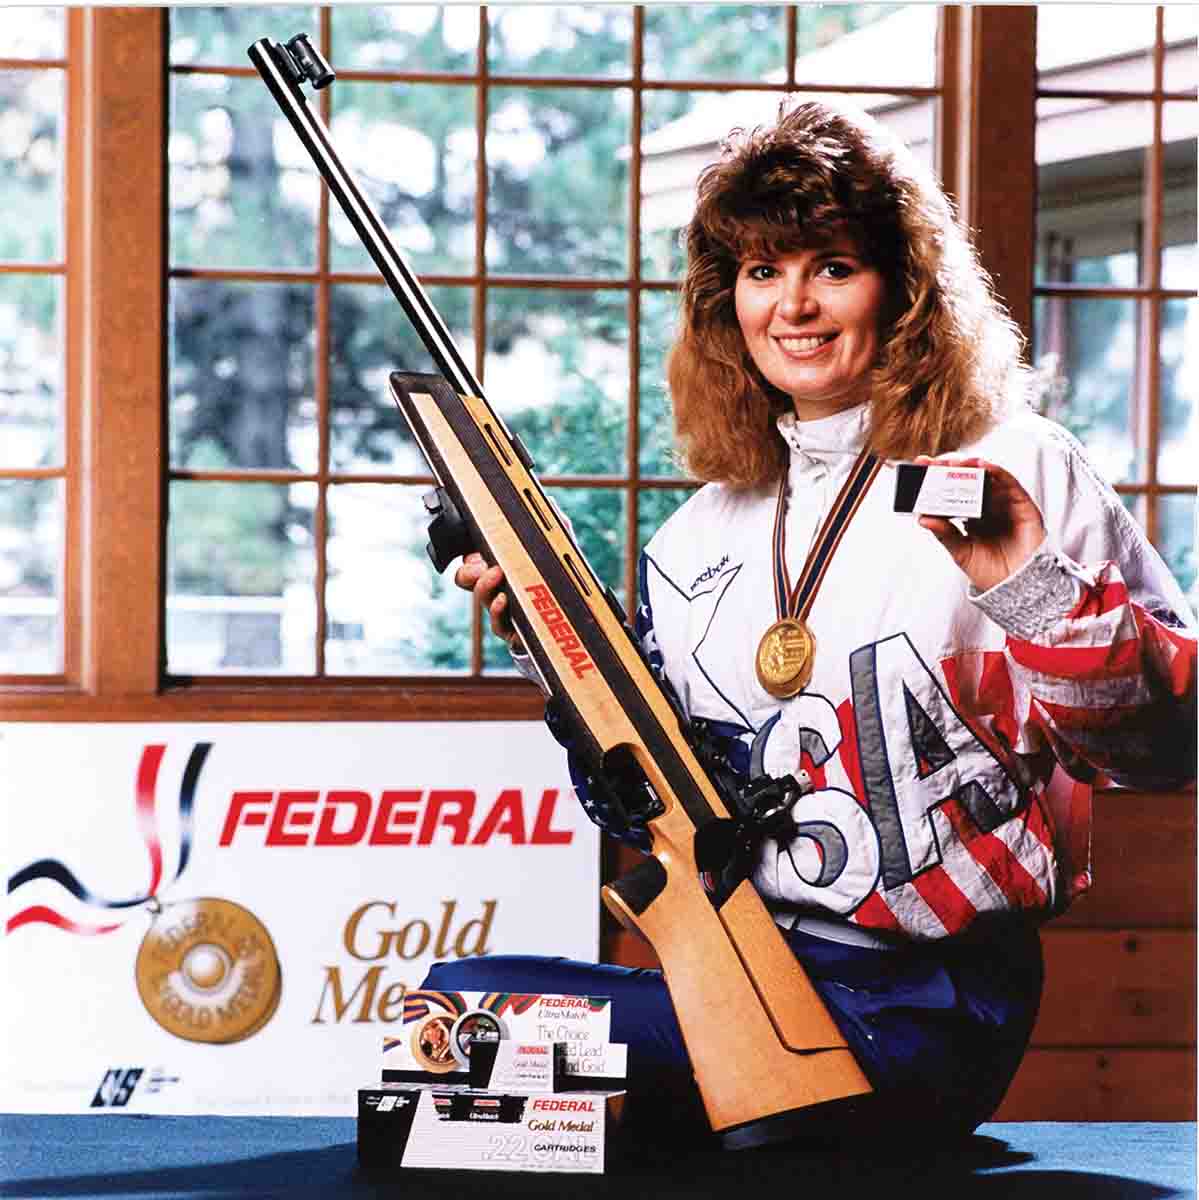 American shooter Launi Meili won Olympic gold in 1992 in smallbore three-position rifle using Federal UltraMatch .22. It was the first medal performance since 1960 by U.S. shooters using American ammunition.